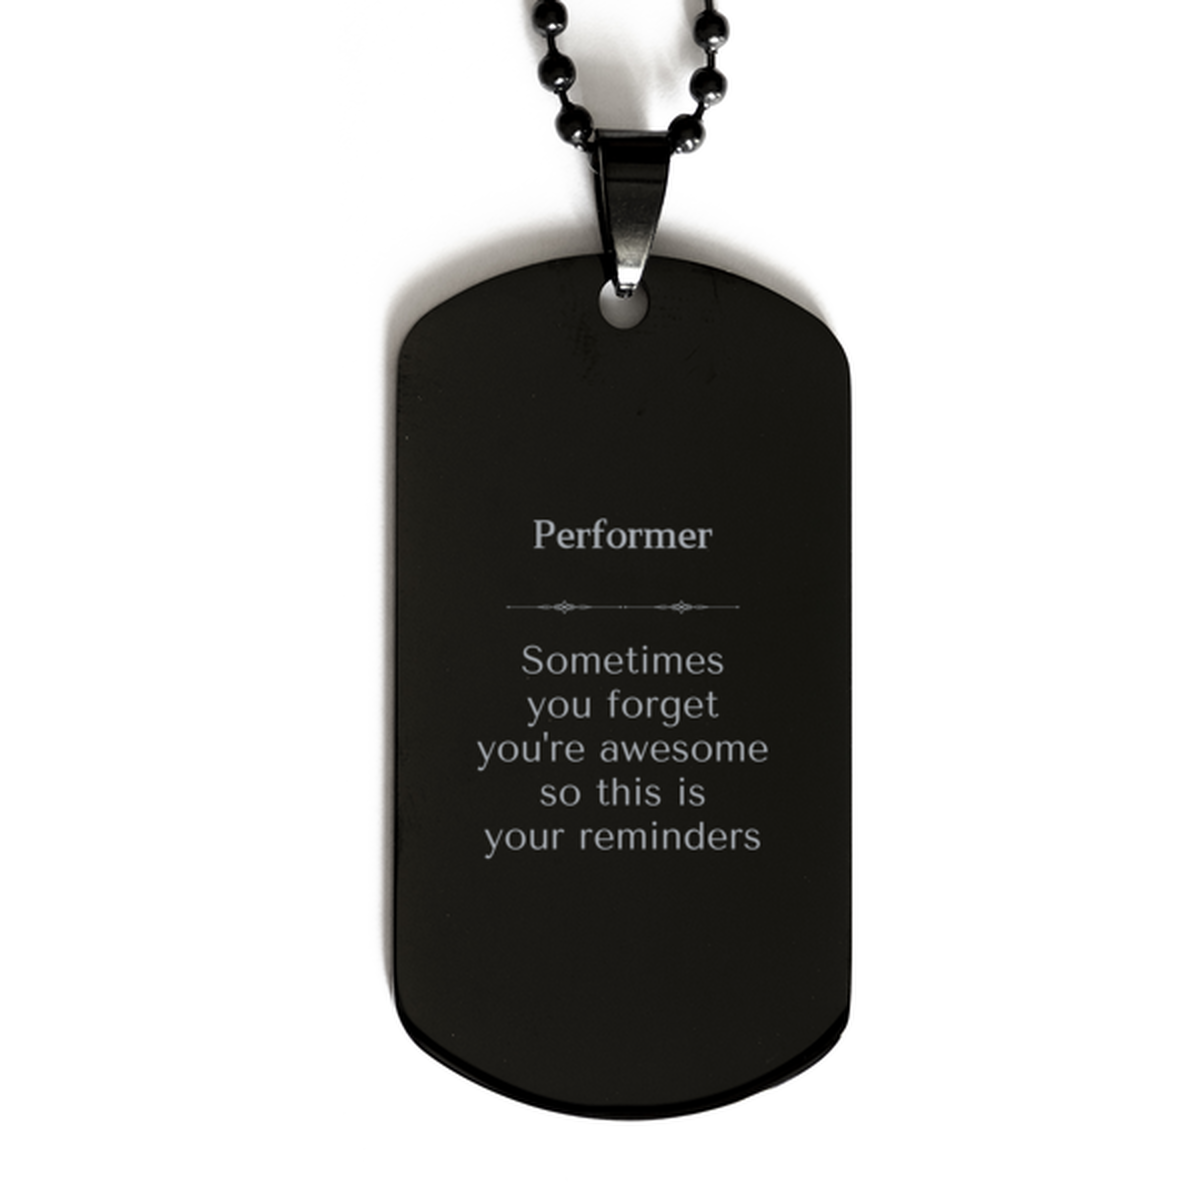 Sentimental Performer Black Dog Tag, Performer Sometimes you forget you're awesome so this is your reminders, Graduation Christmas Birthday Gifts for Performer, Men, Women, Coworkers